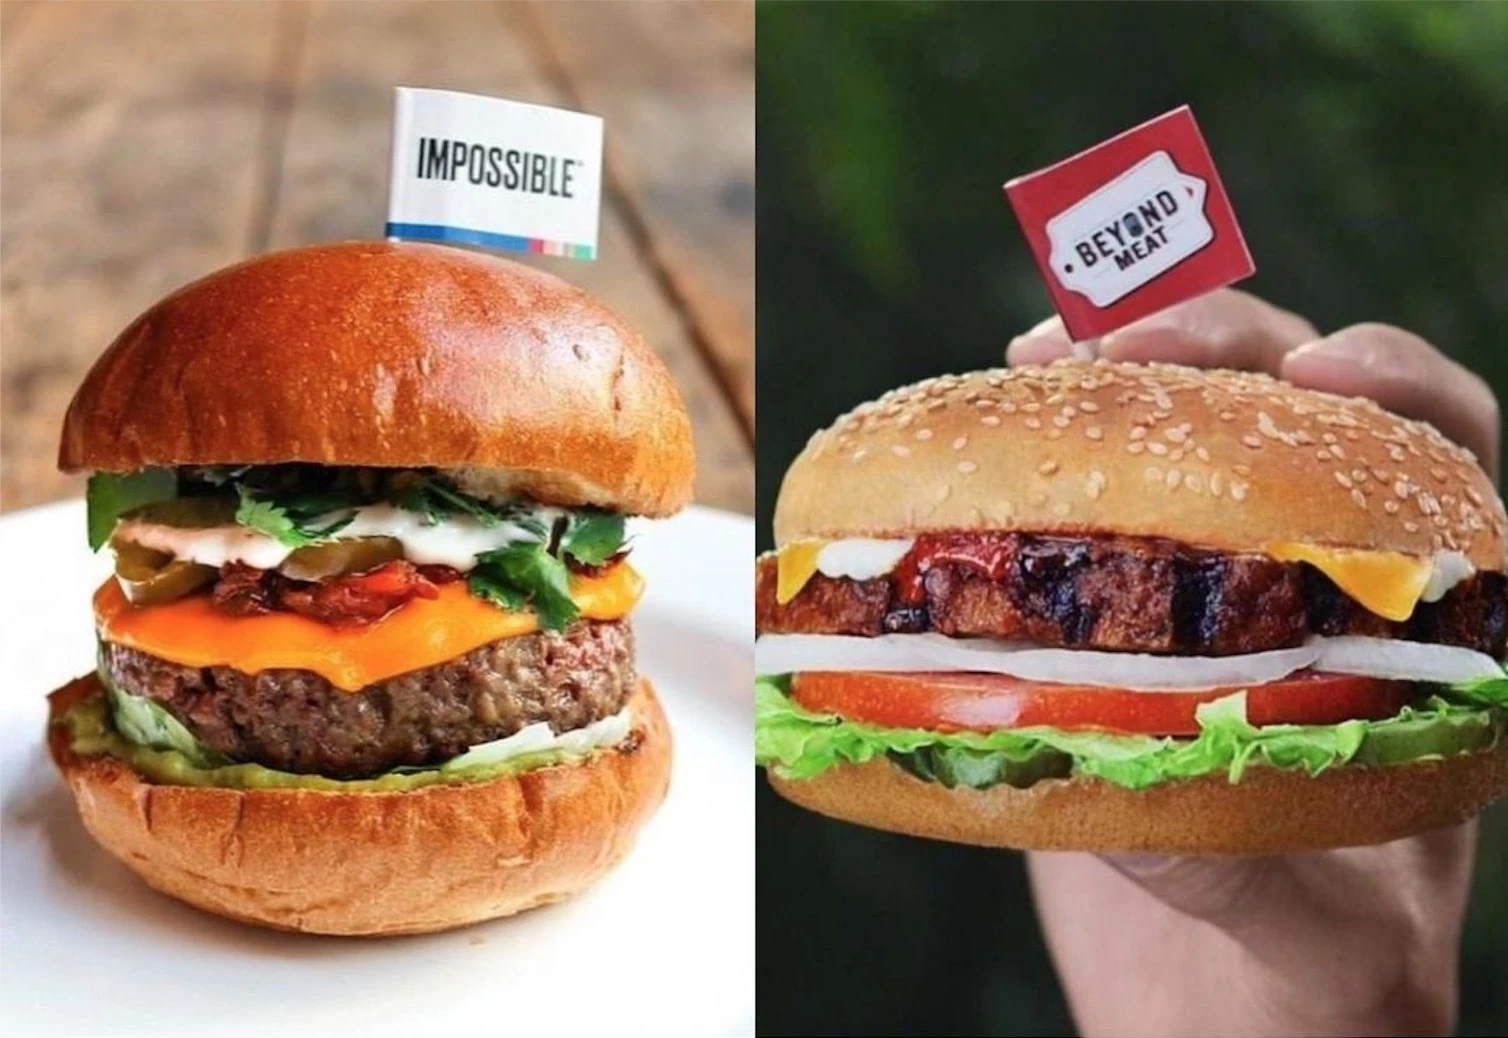 Which Meatless Burger is Healthier? Impossible or Beyond